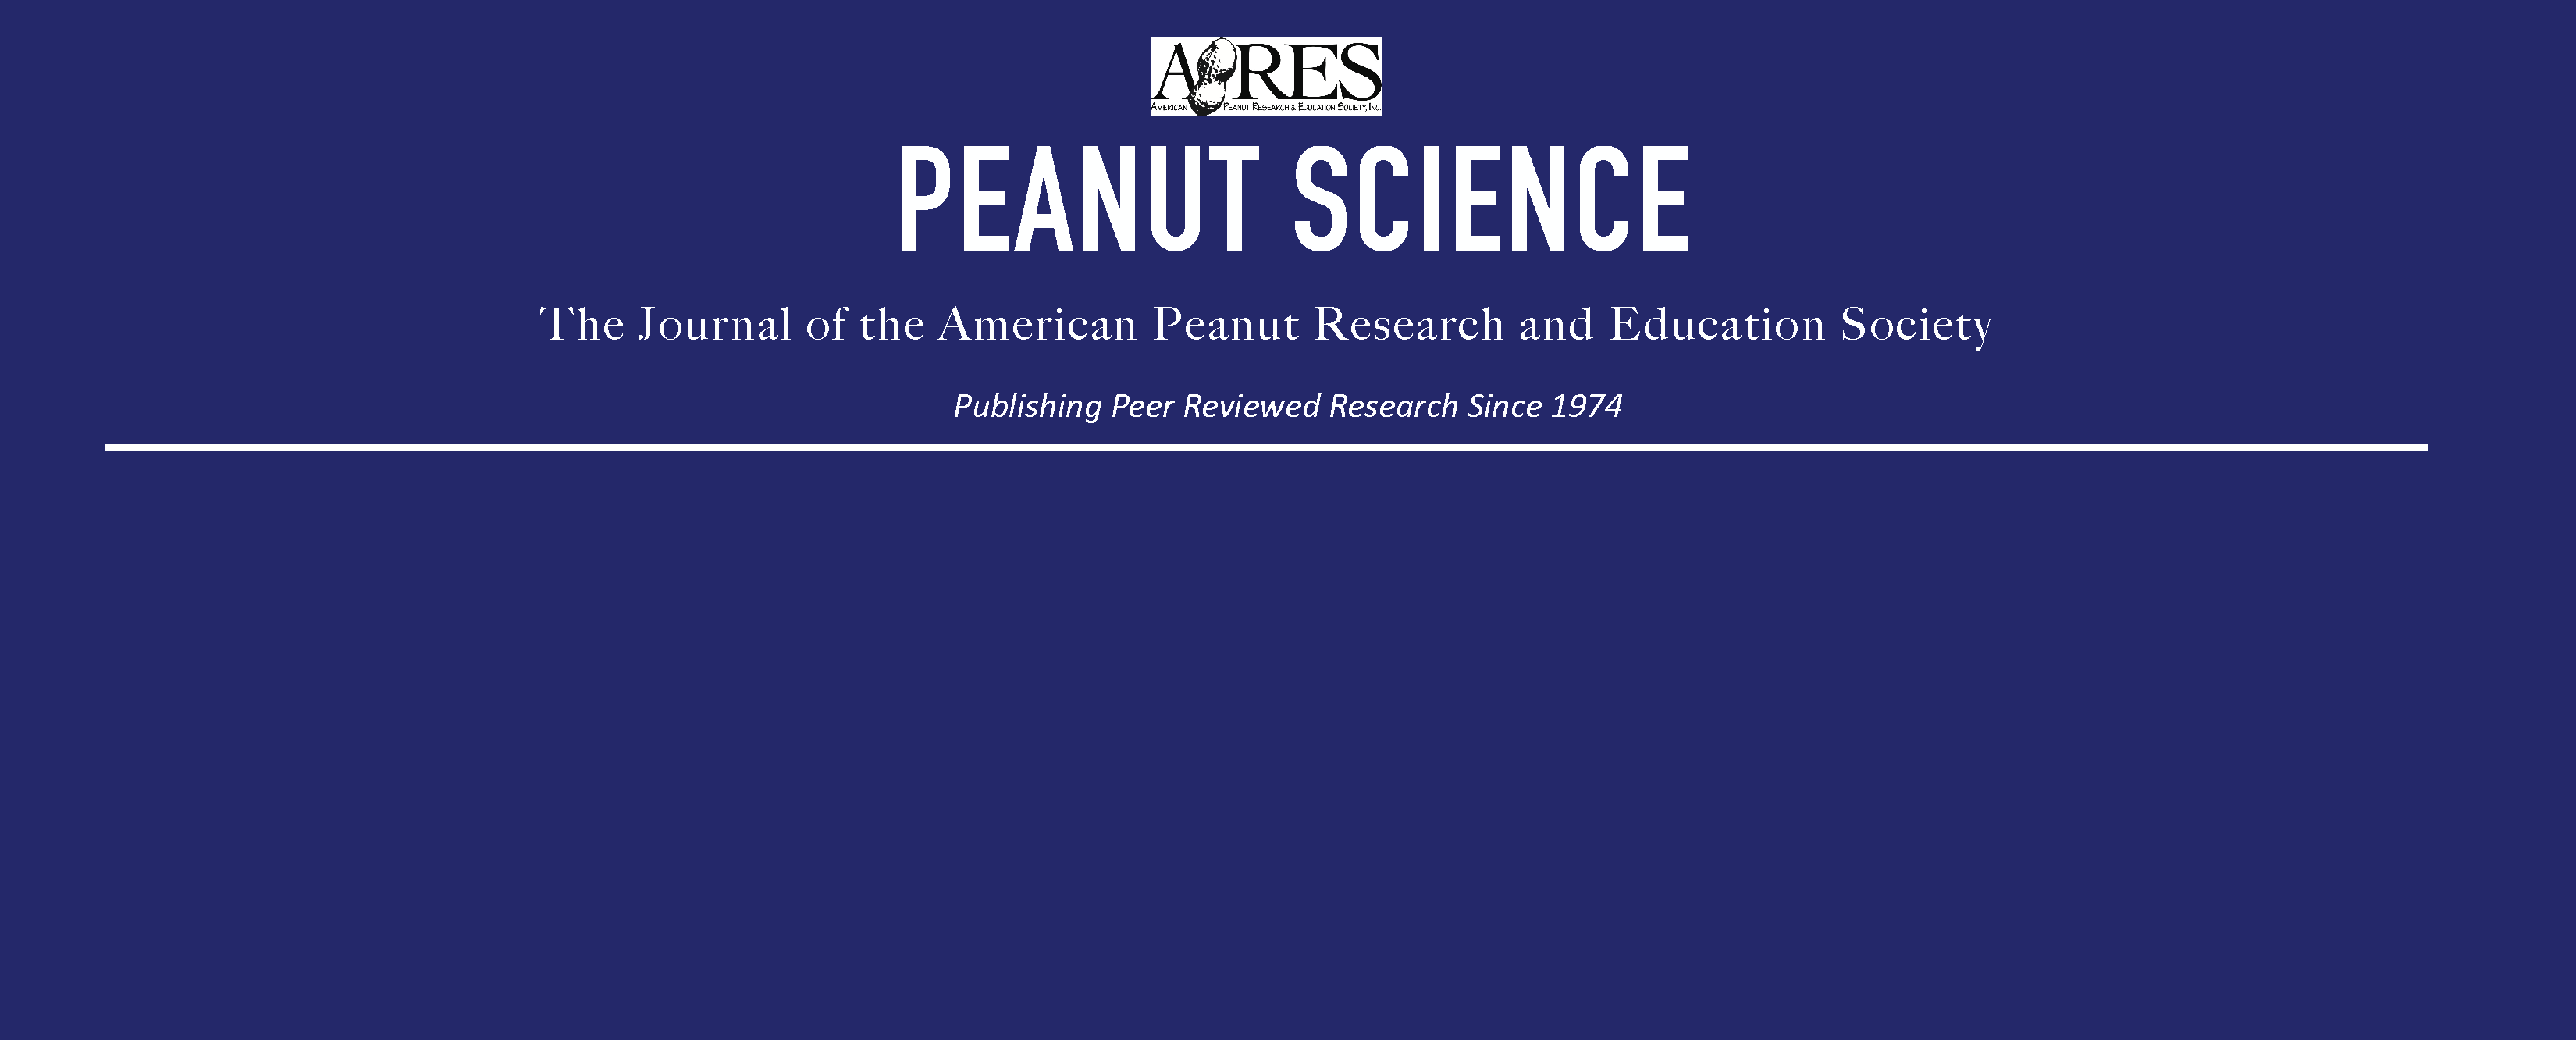 Evaluation of Free Amino Acid and Free Sugar Contents in Five Lines of Virginia-Type Peanuts at Four Locations¹